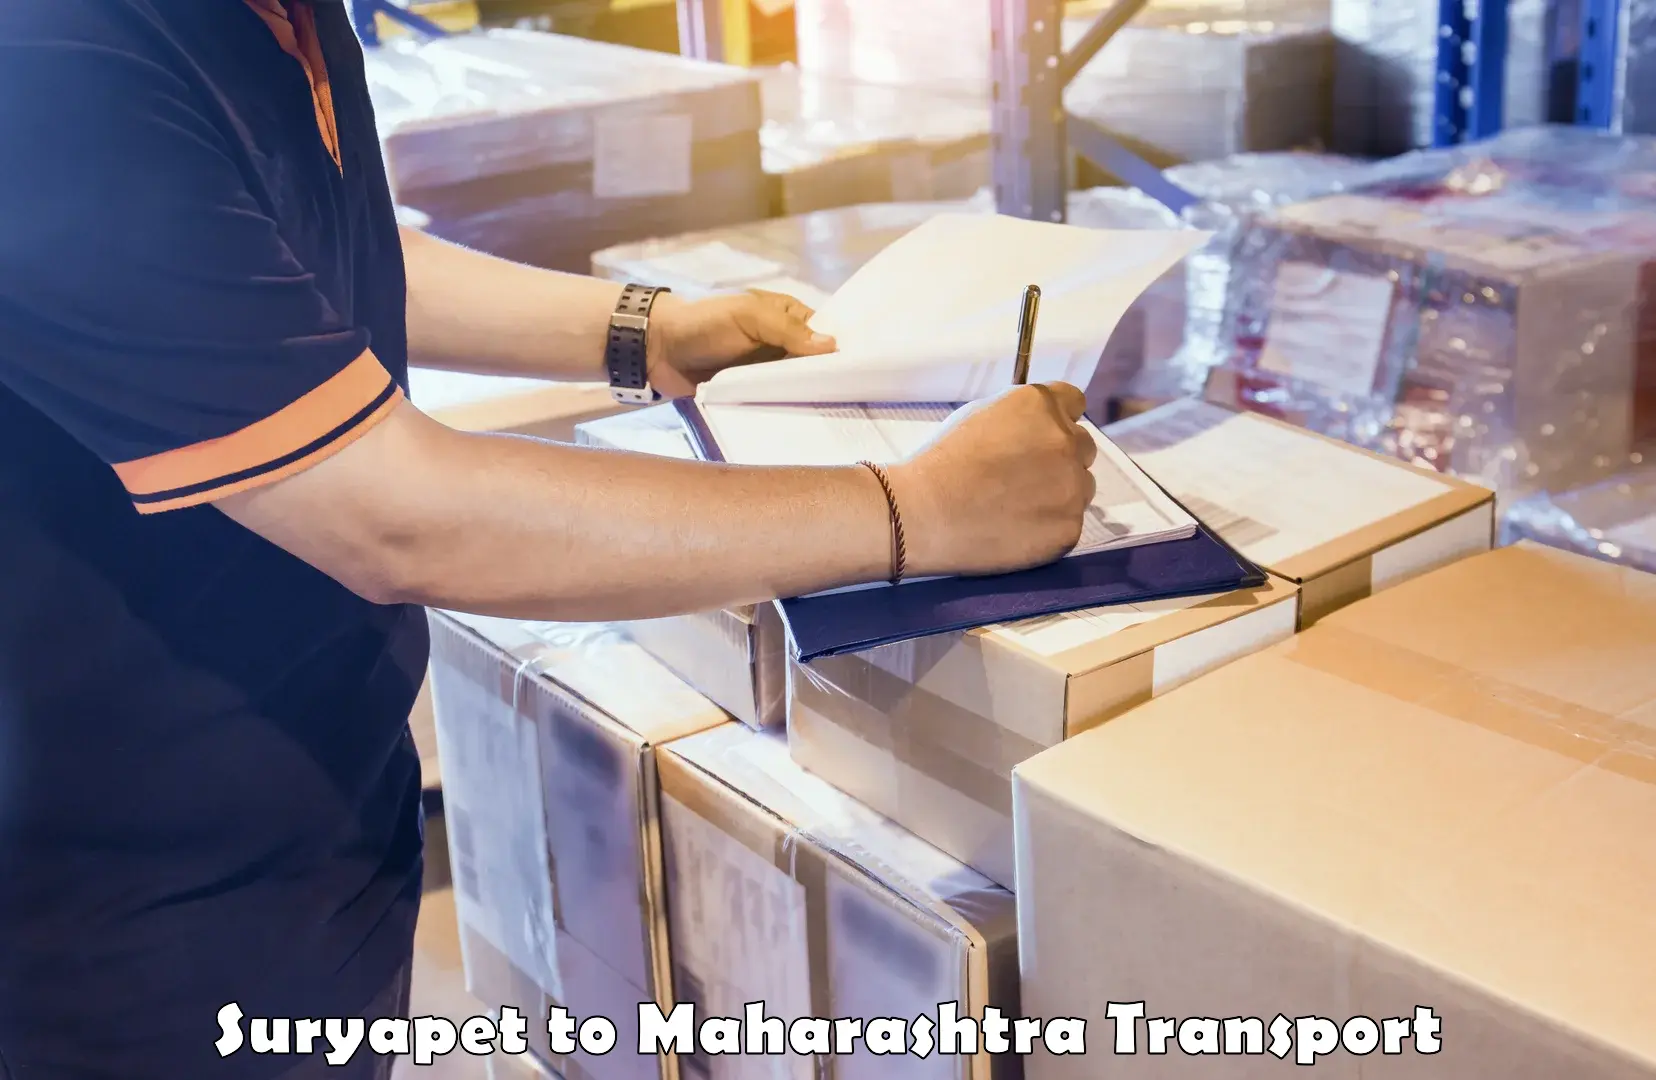 Truck transport companies in India Suryapet to Institute of Chemical Technology Mumbai